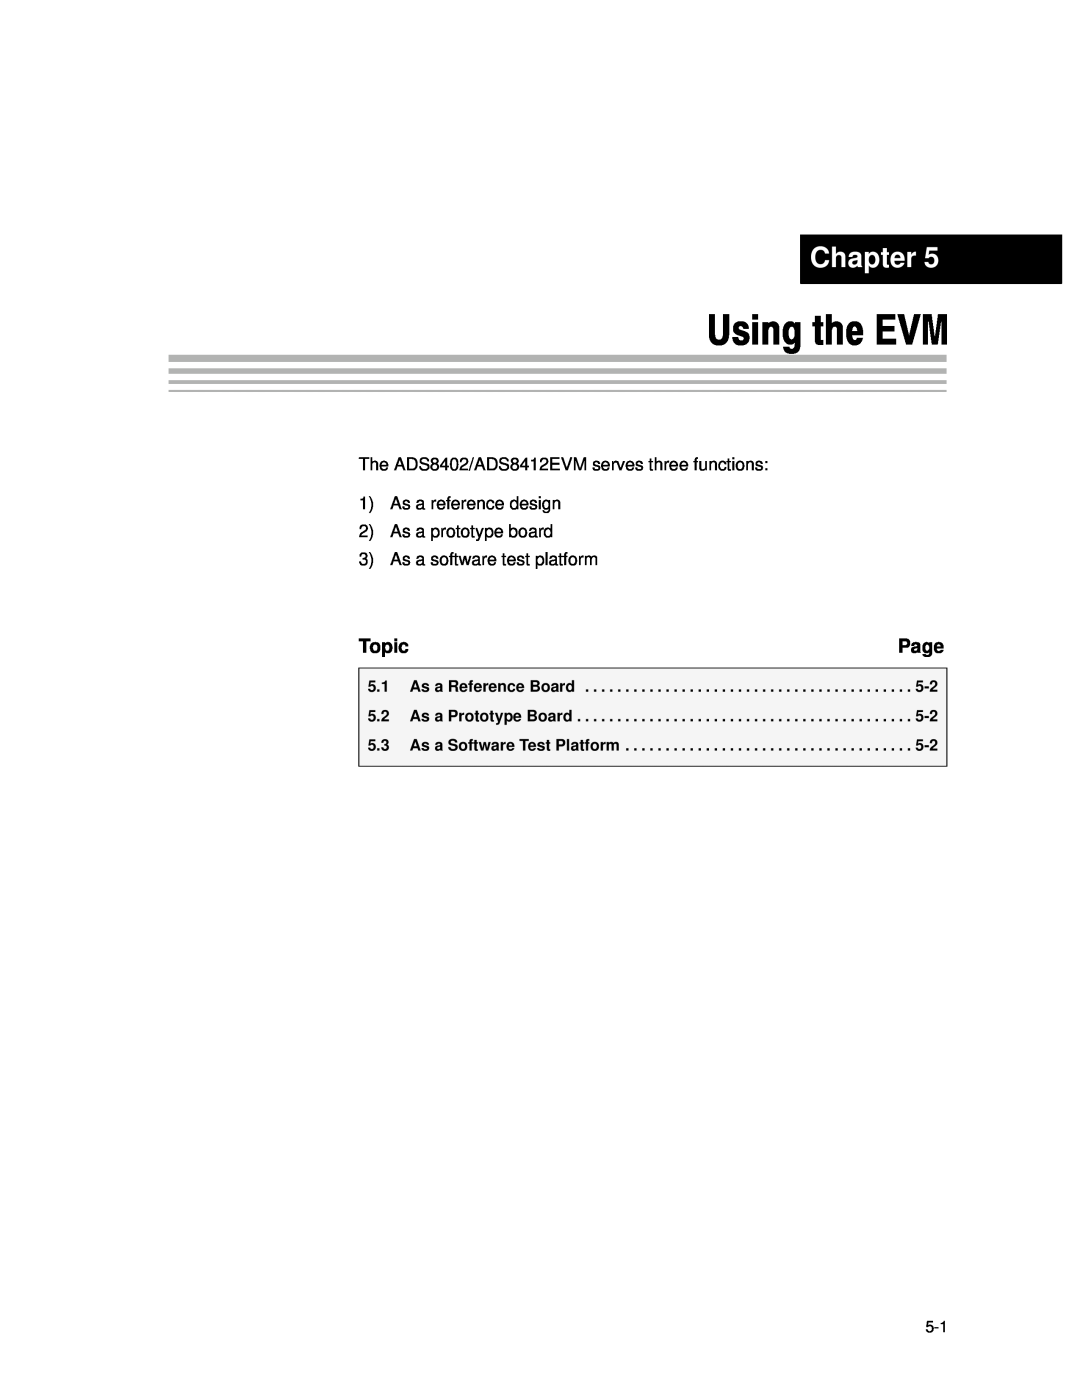 Texas Instruments ADS8402 EVM, ADS8412 EVM manual Using the EVM, Chapter, Page, Topic, As a software test platform 